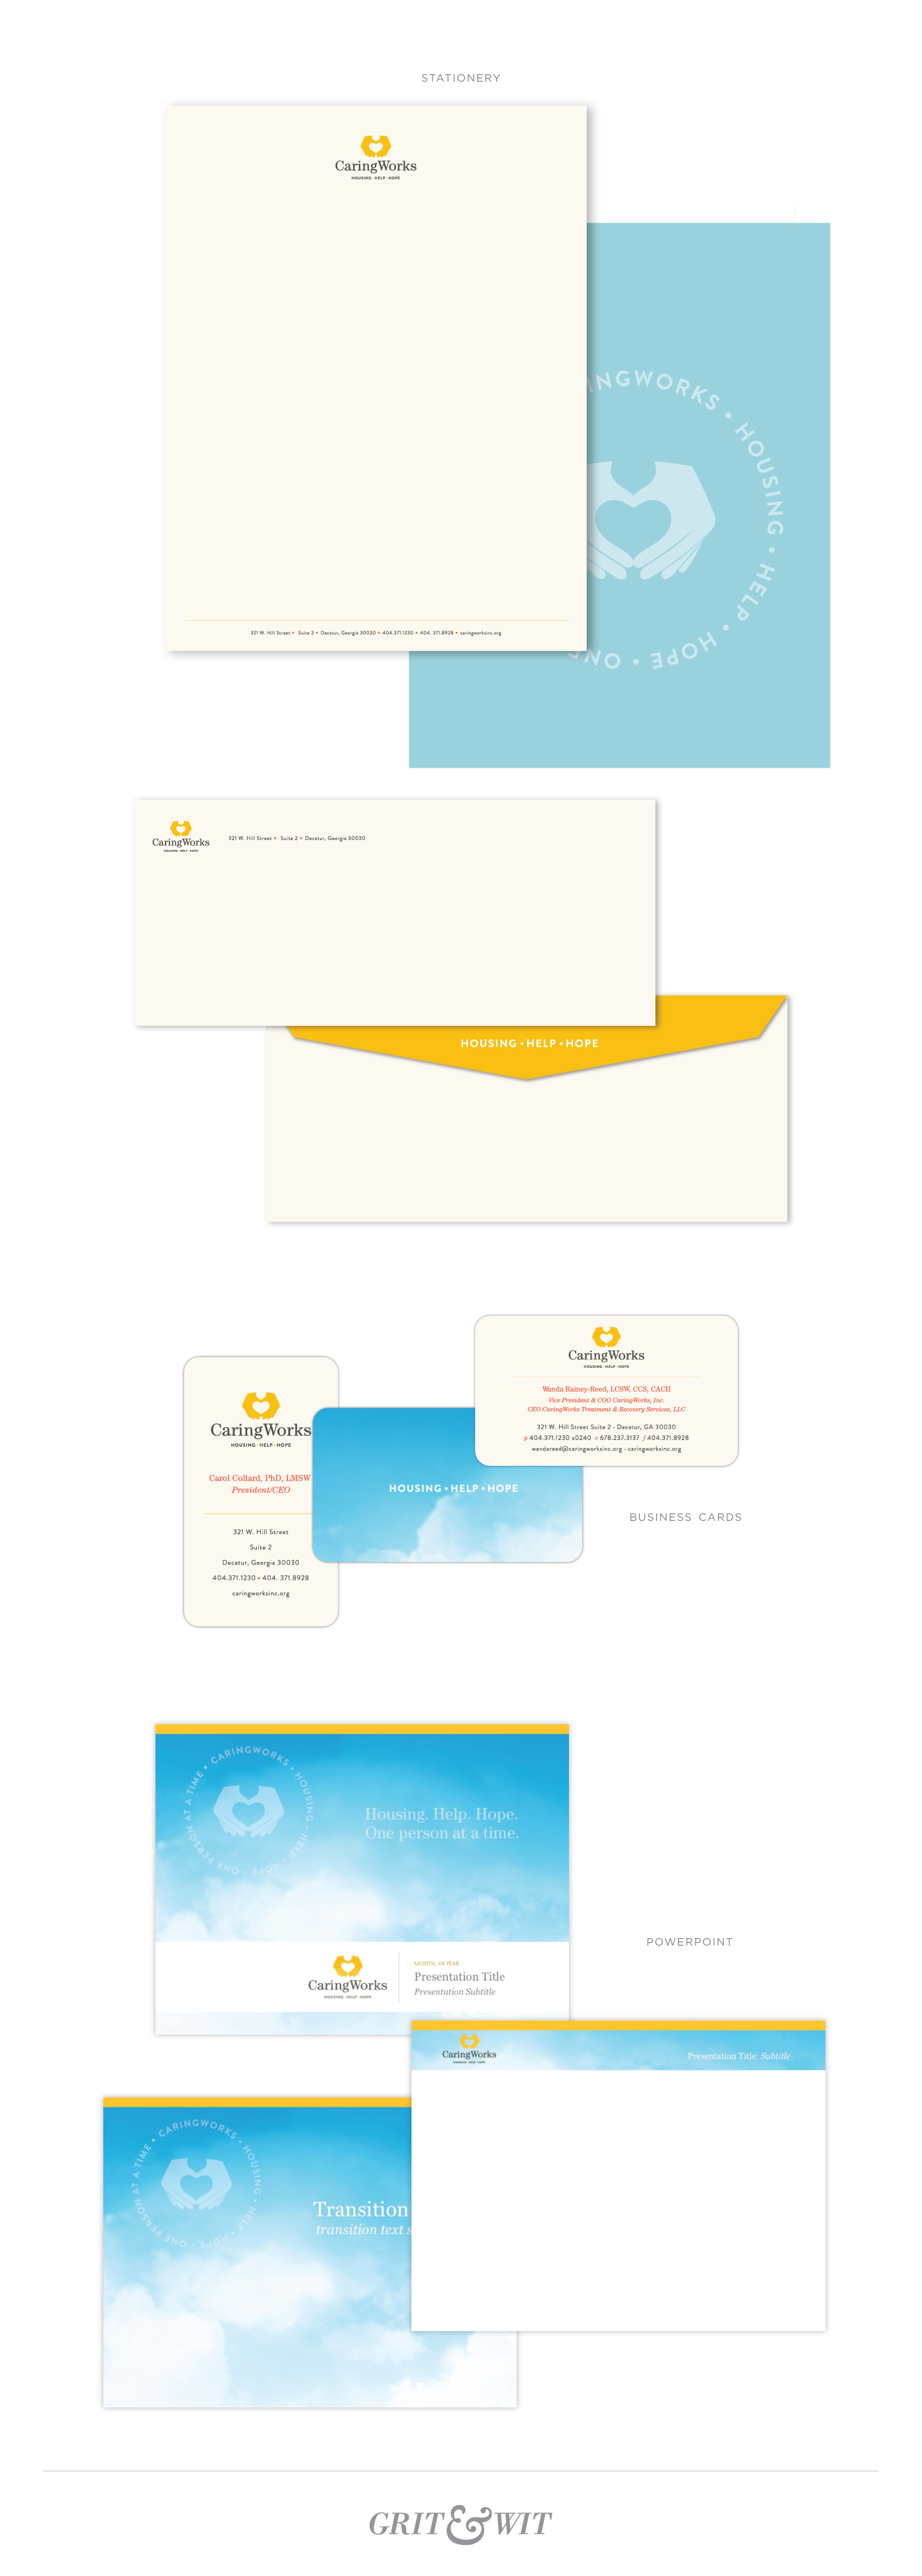 CaringWorks_Brand_Collateral